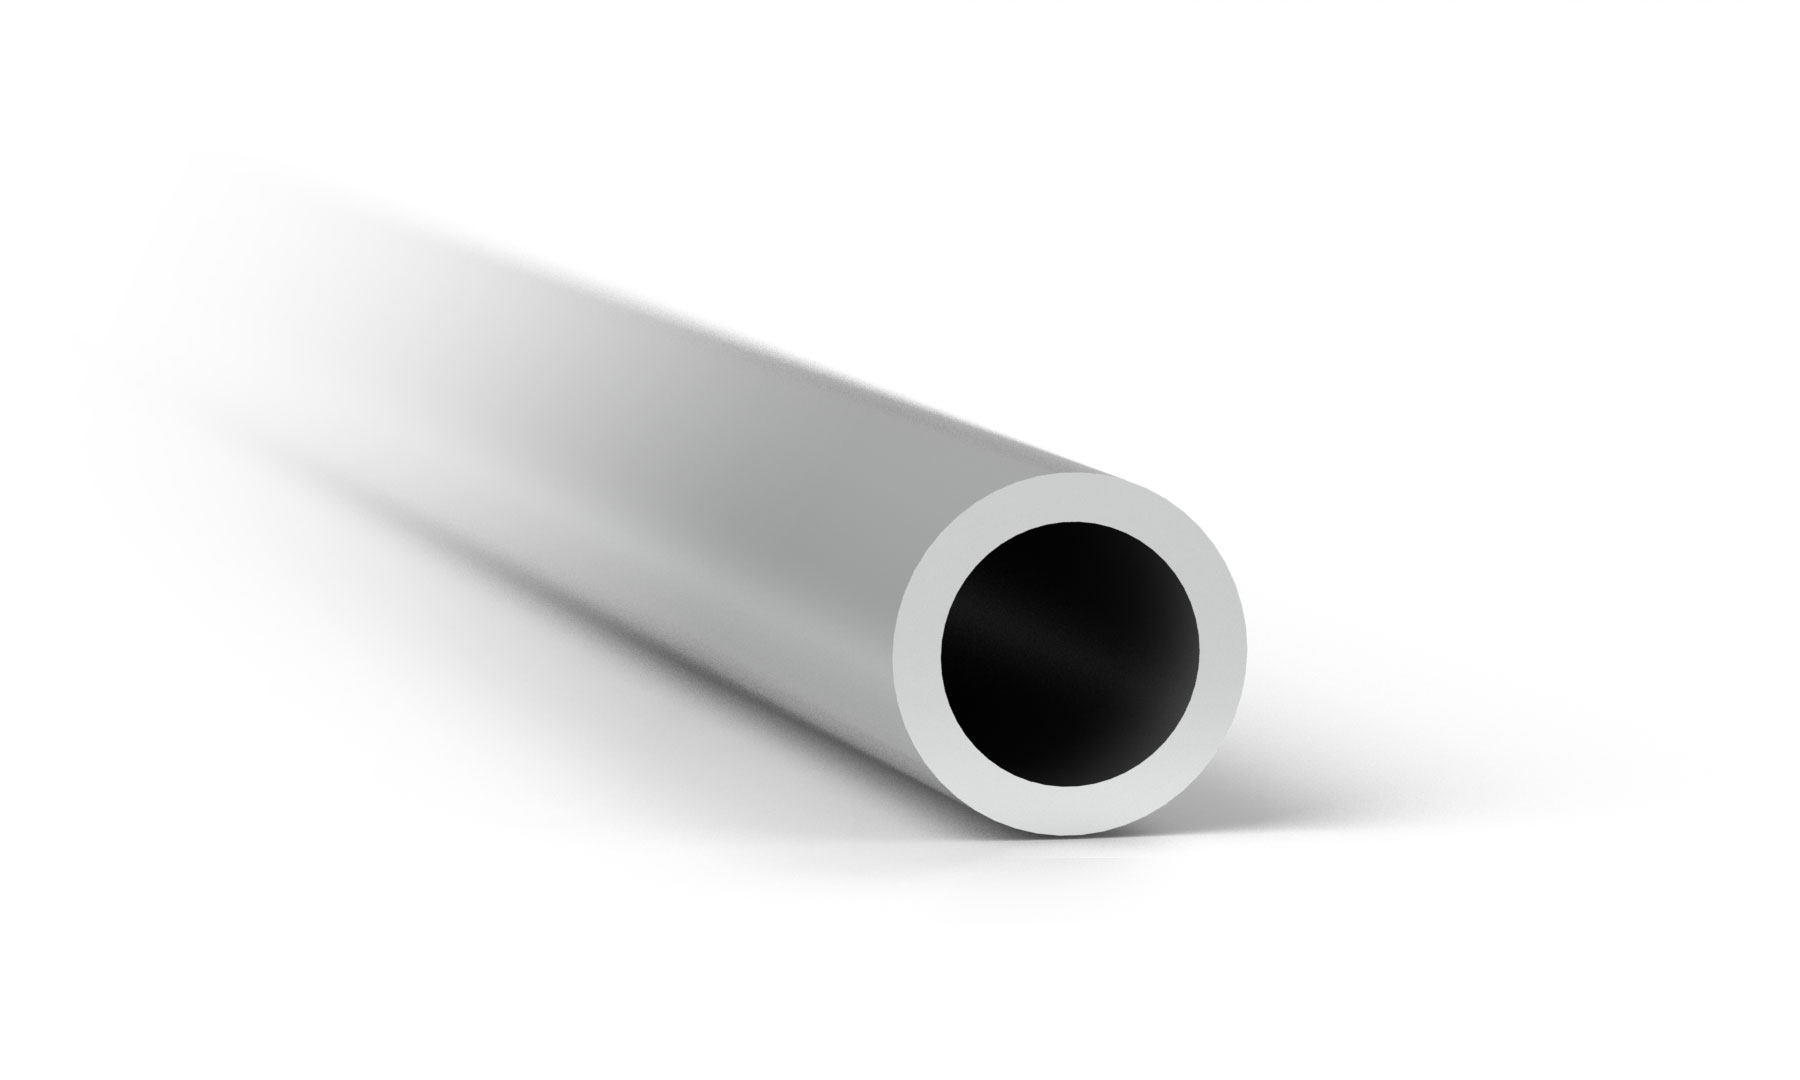 Stainless Steel Tubing White 1/16" OD x .030" ID x 25ft - Biotech 1 16 Od Stainless Steel Tubing